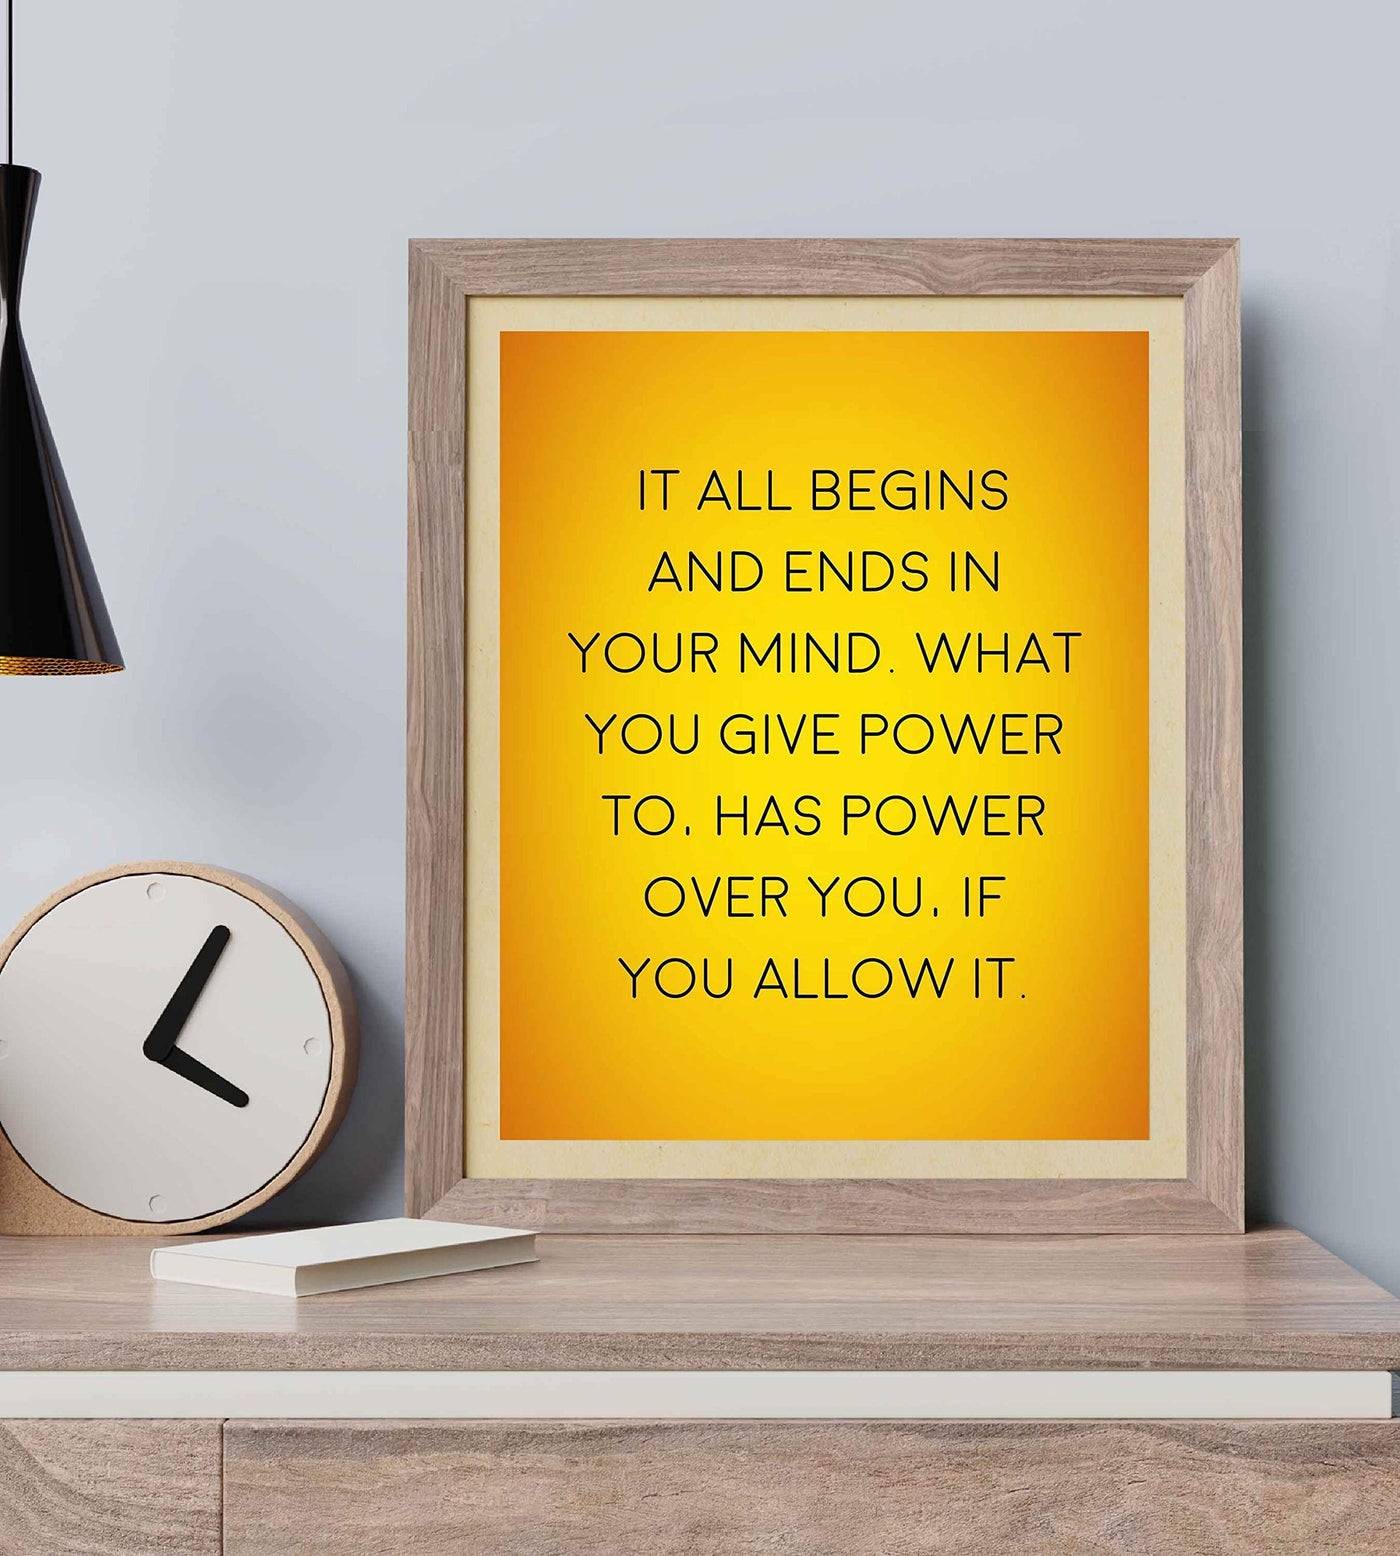 It All Begins & Ends In Your Mind Inspirational Quotes Wall Art -8 x 10" Modern Typographic Poster Print-Ready to Frame. Positive Home-Office-Studio-Classroom-Zen Decor! Great Gift of Motivation!